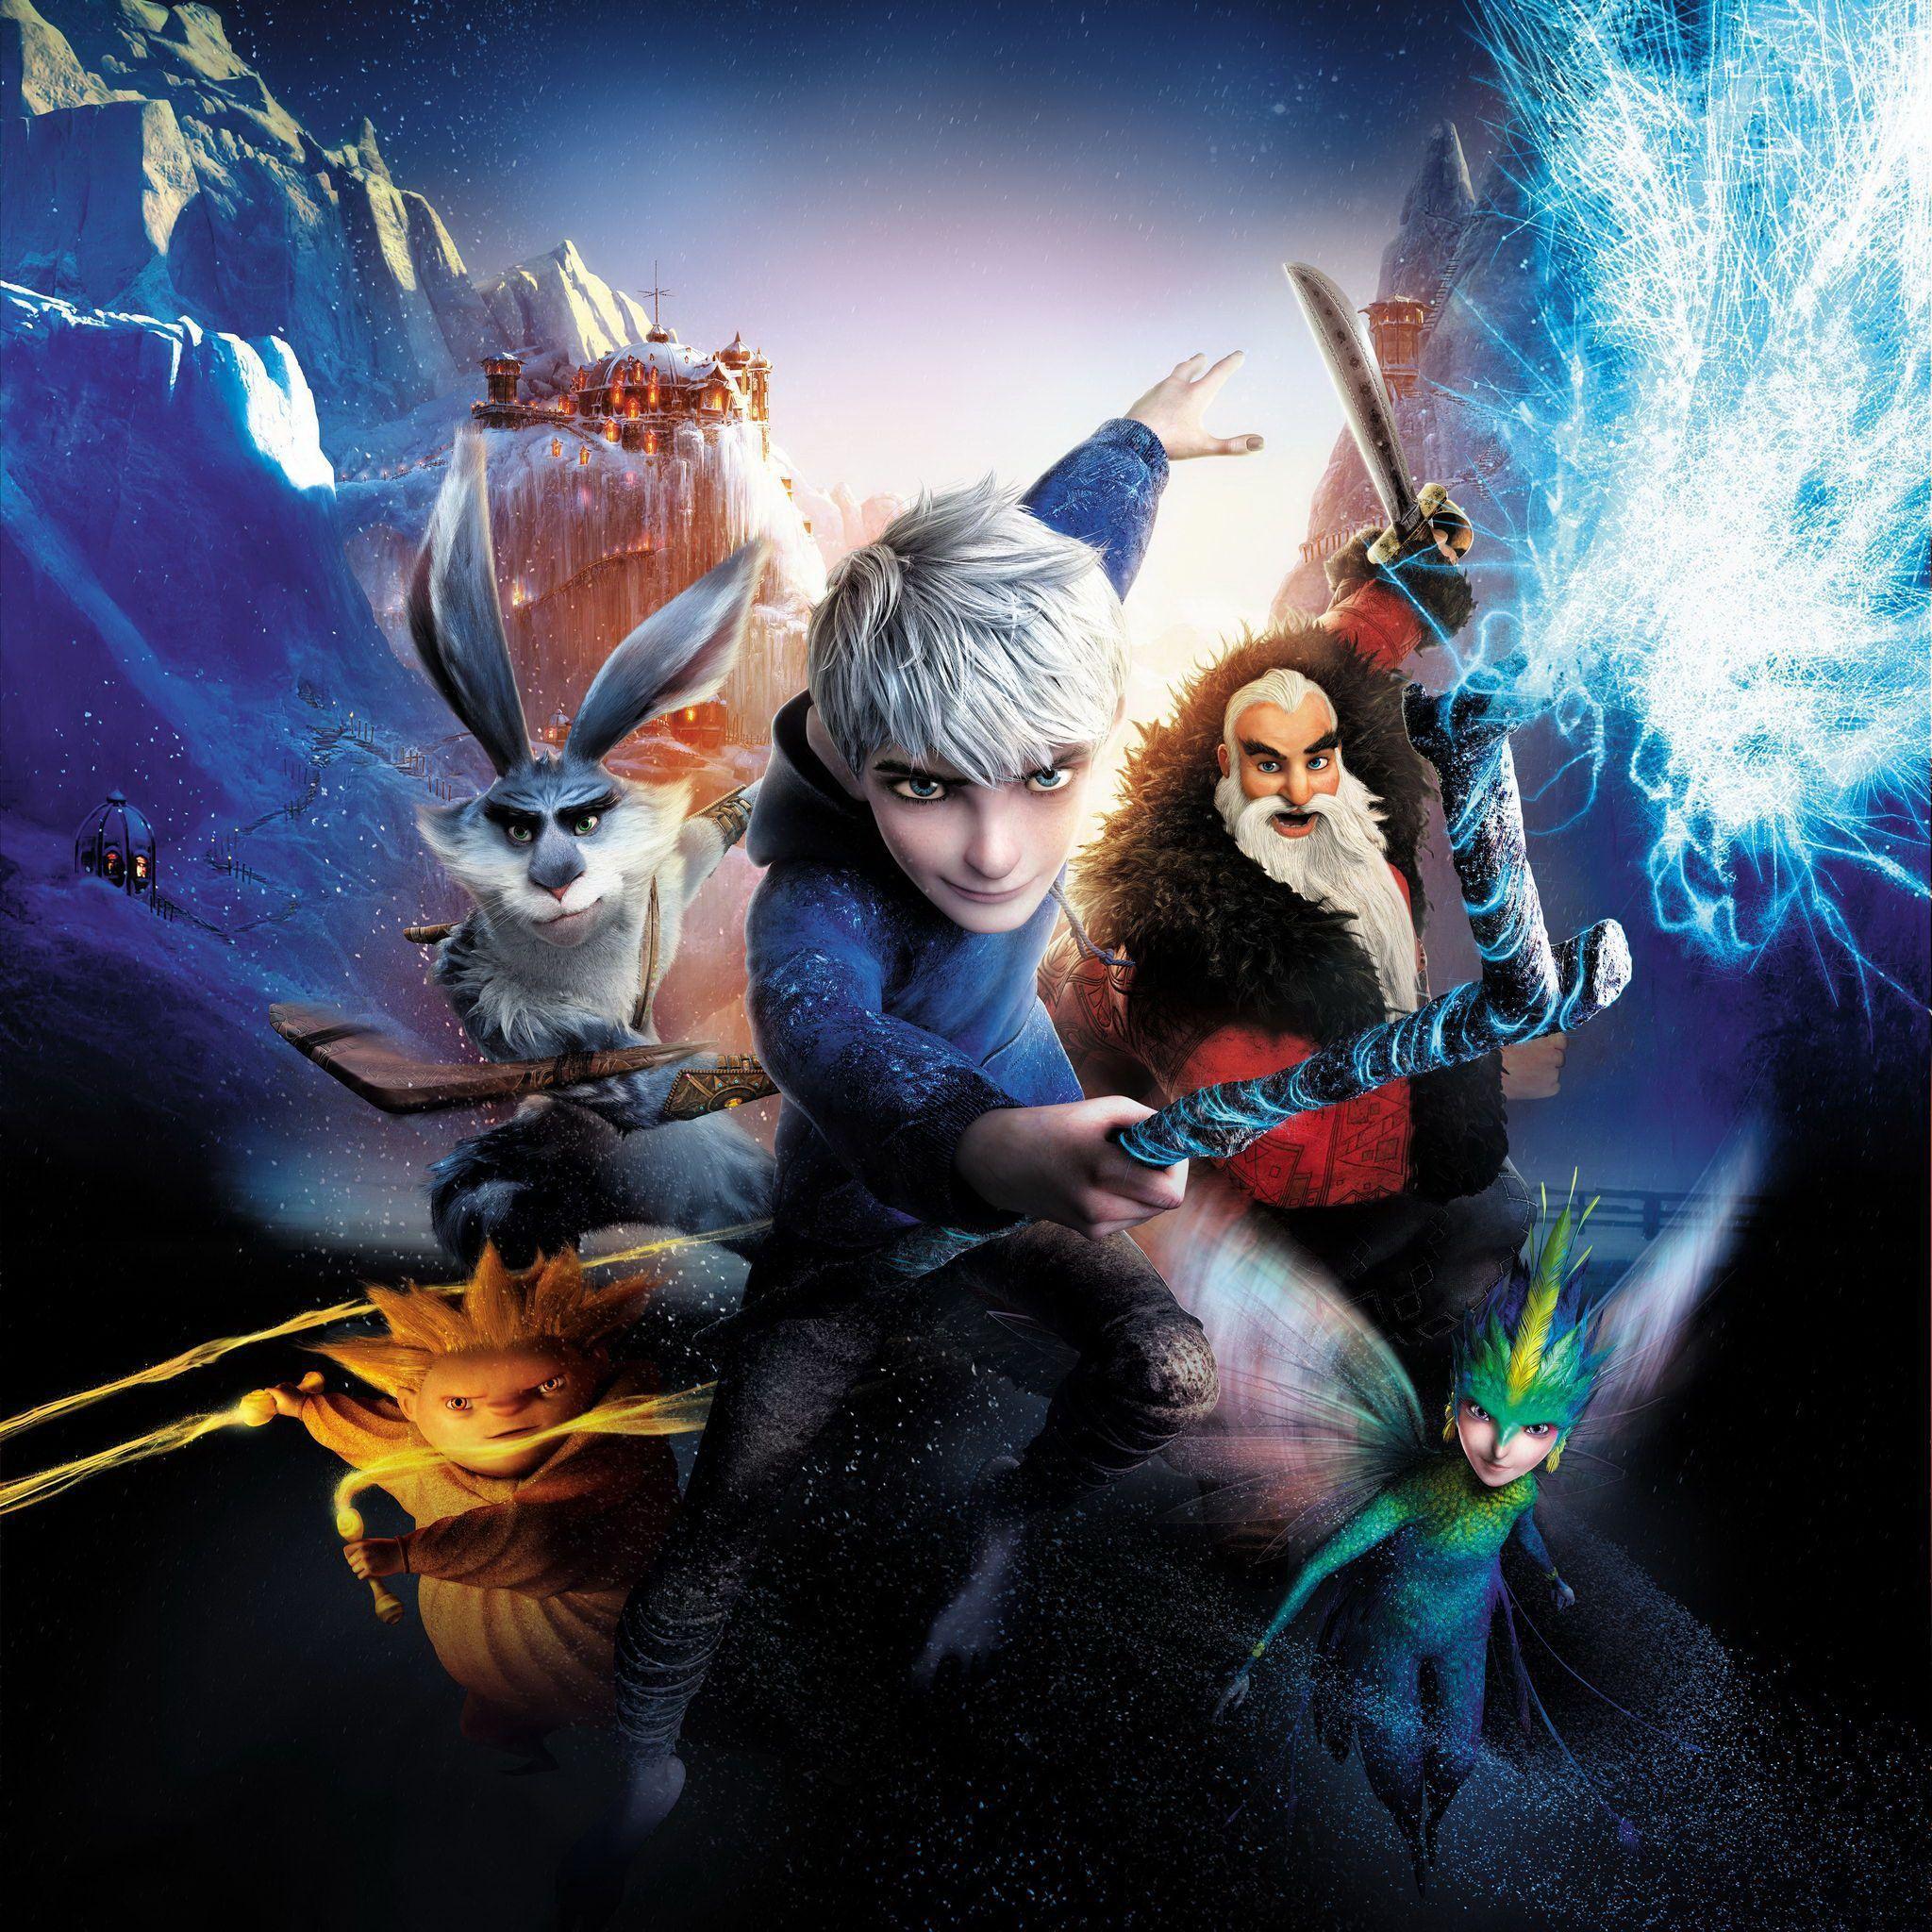 Rise Of The Guardians Wallpaper